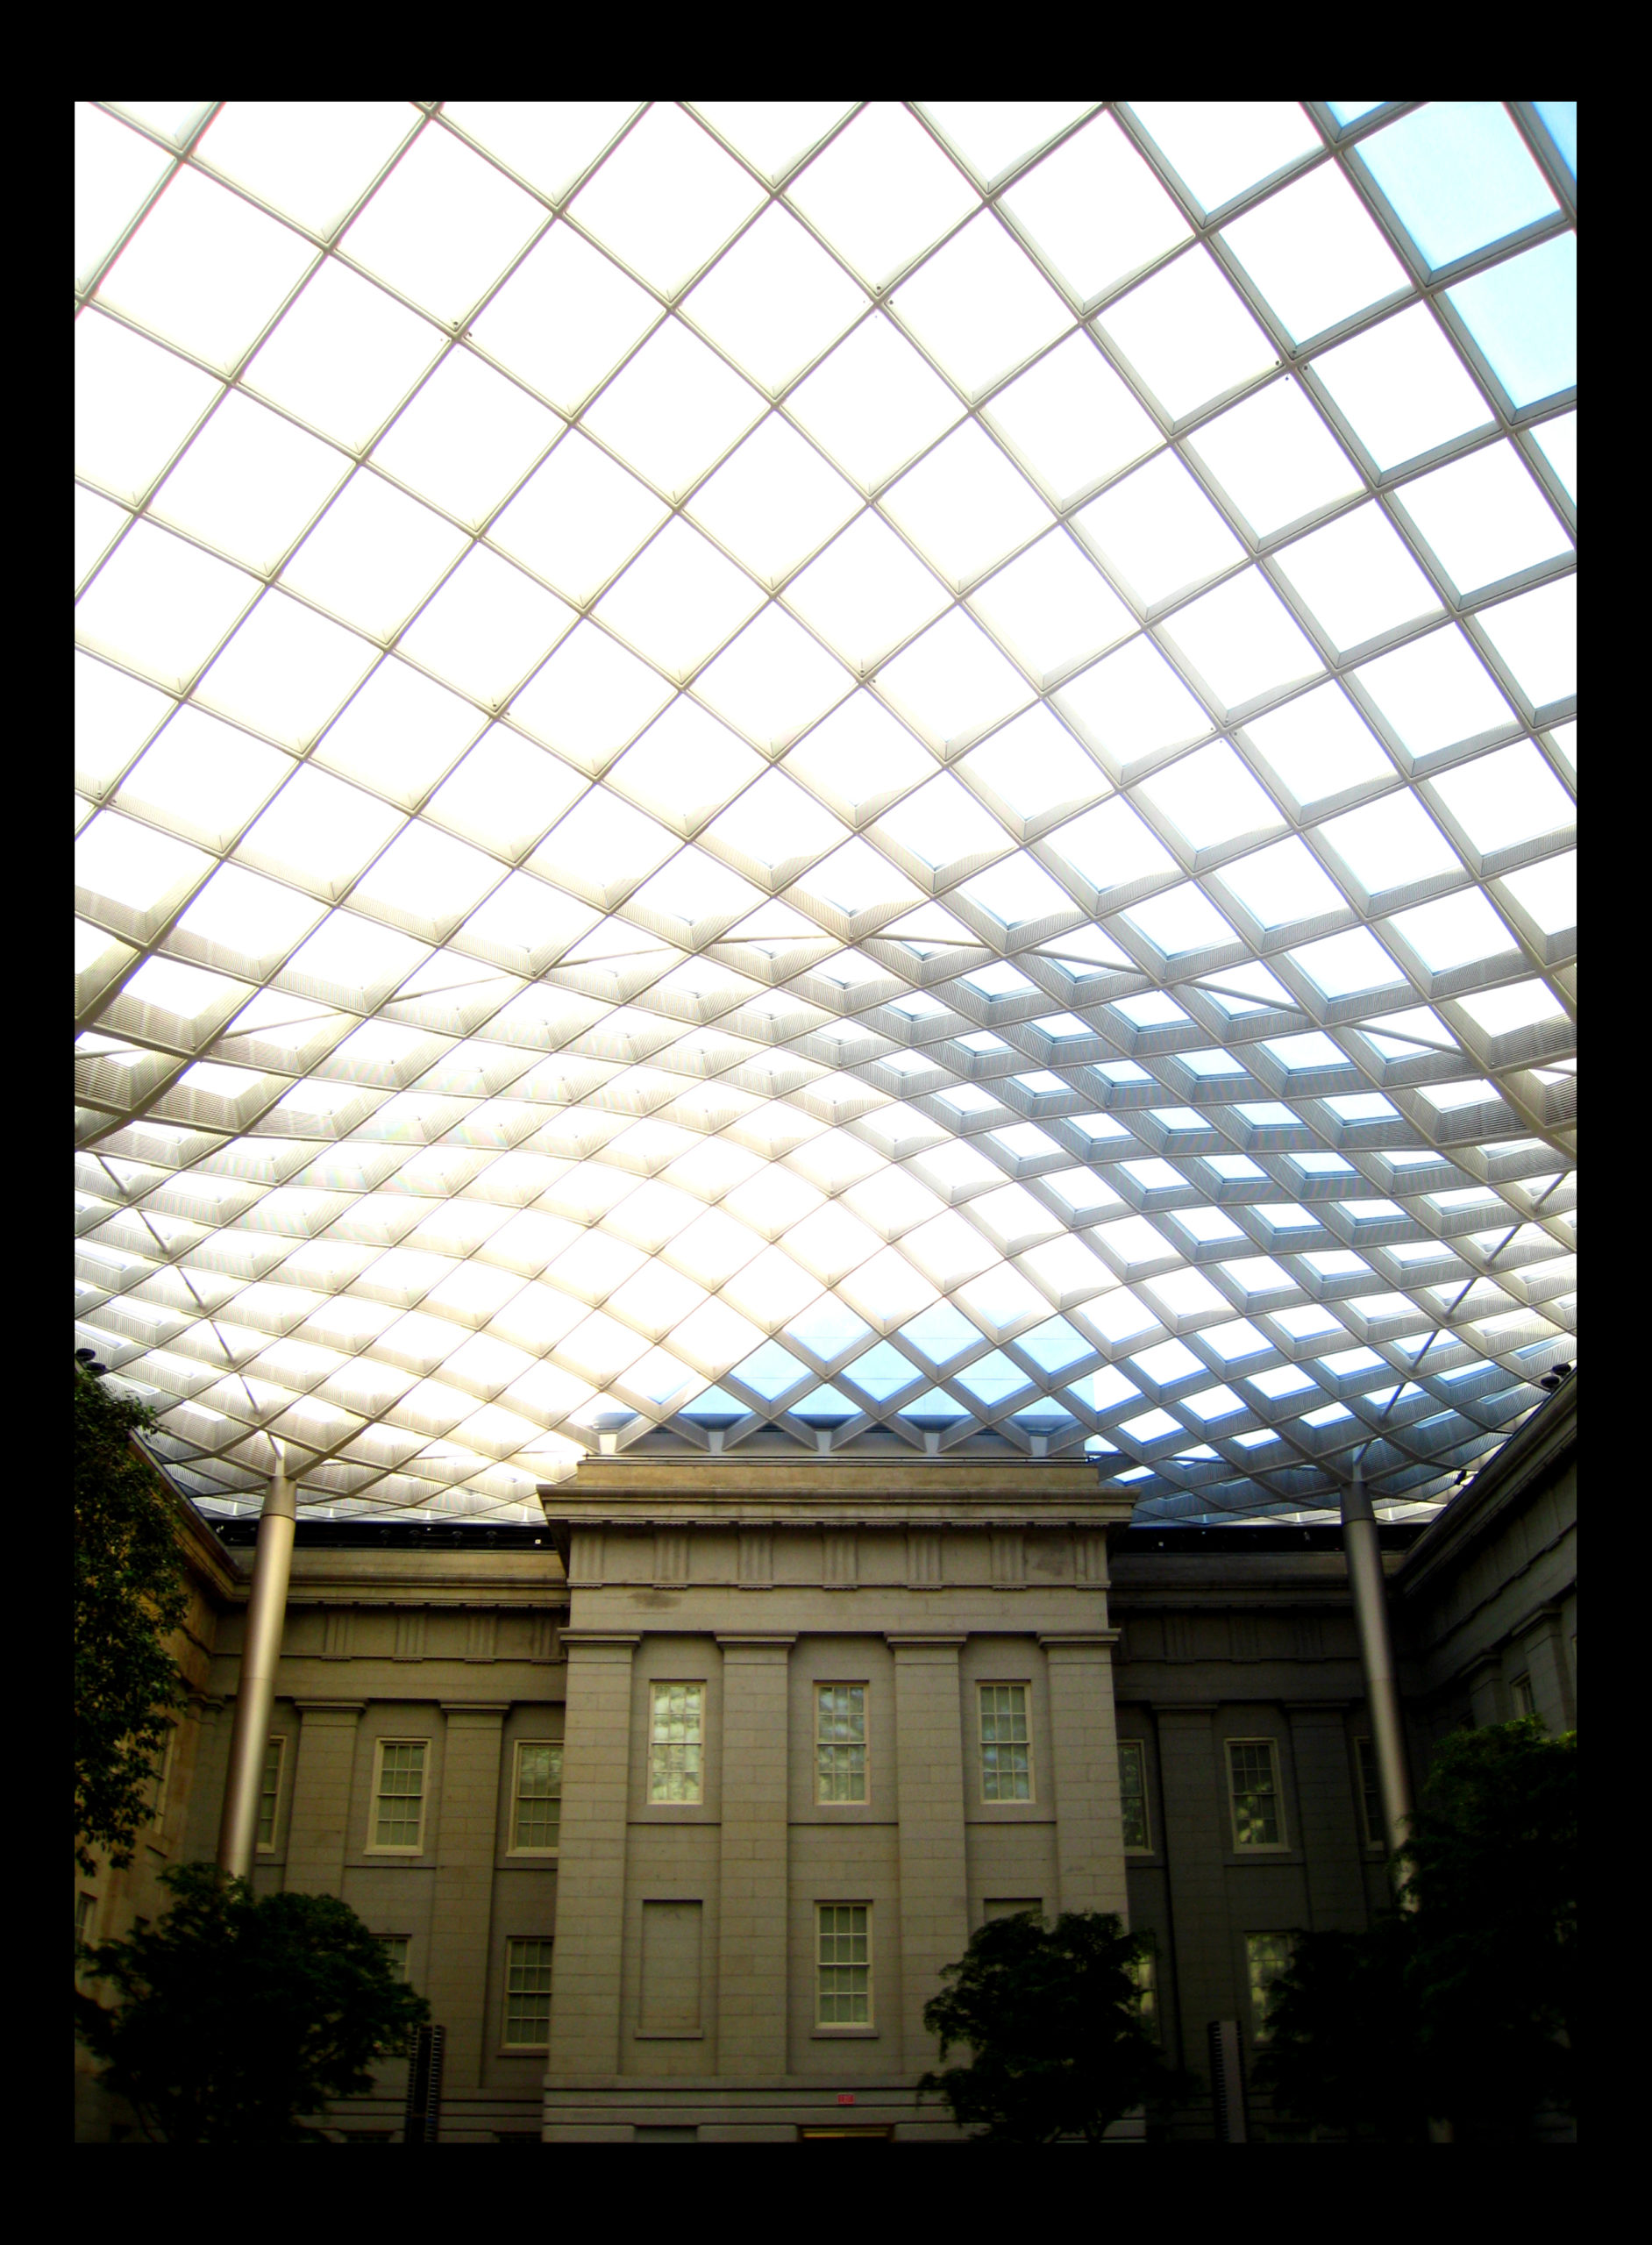 Restored Courtyard of the former US Patent Office, Washington D.C., January 2008